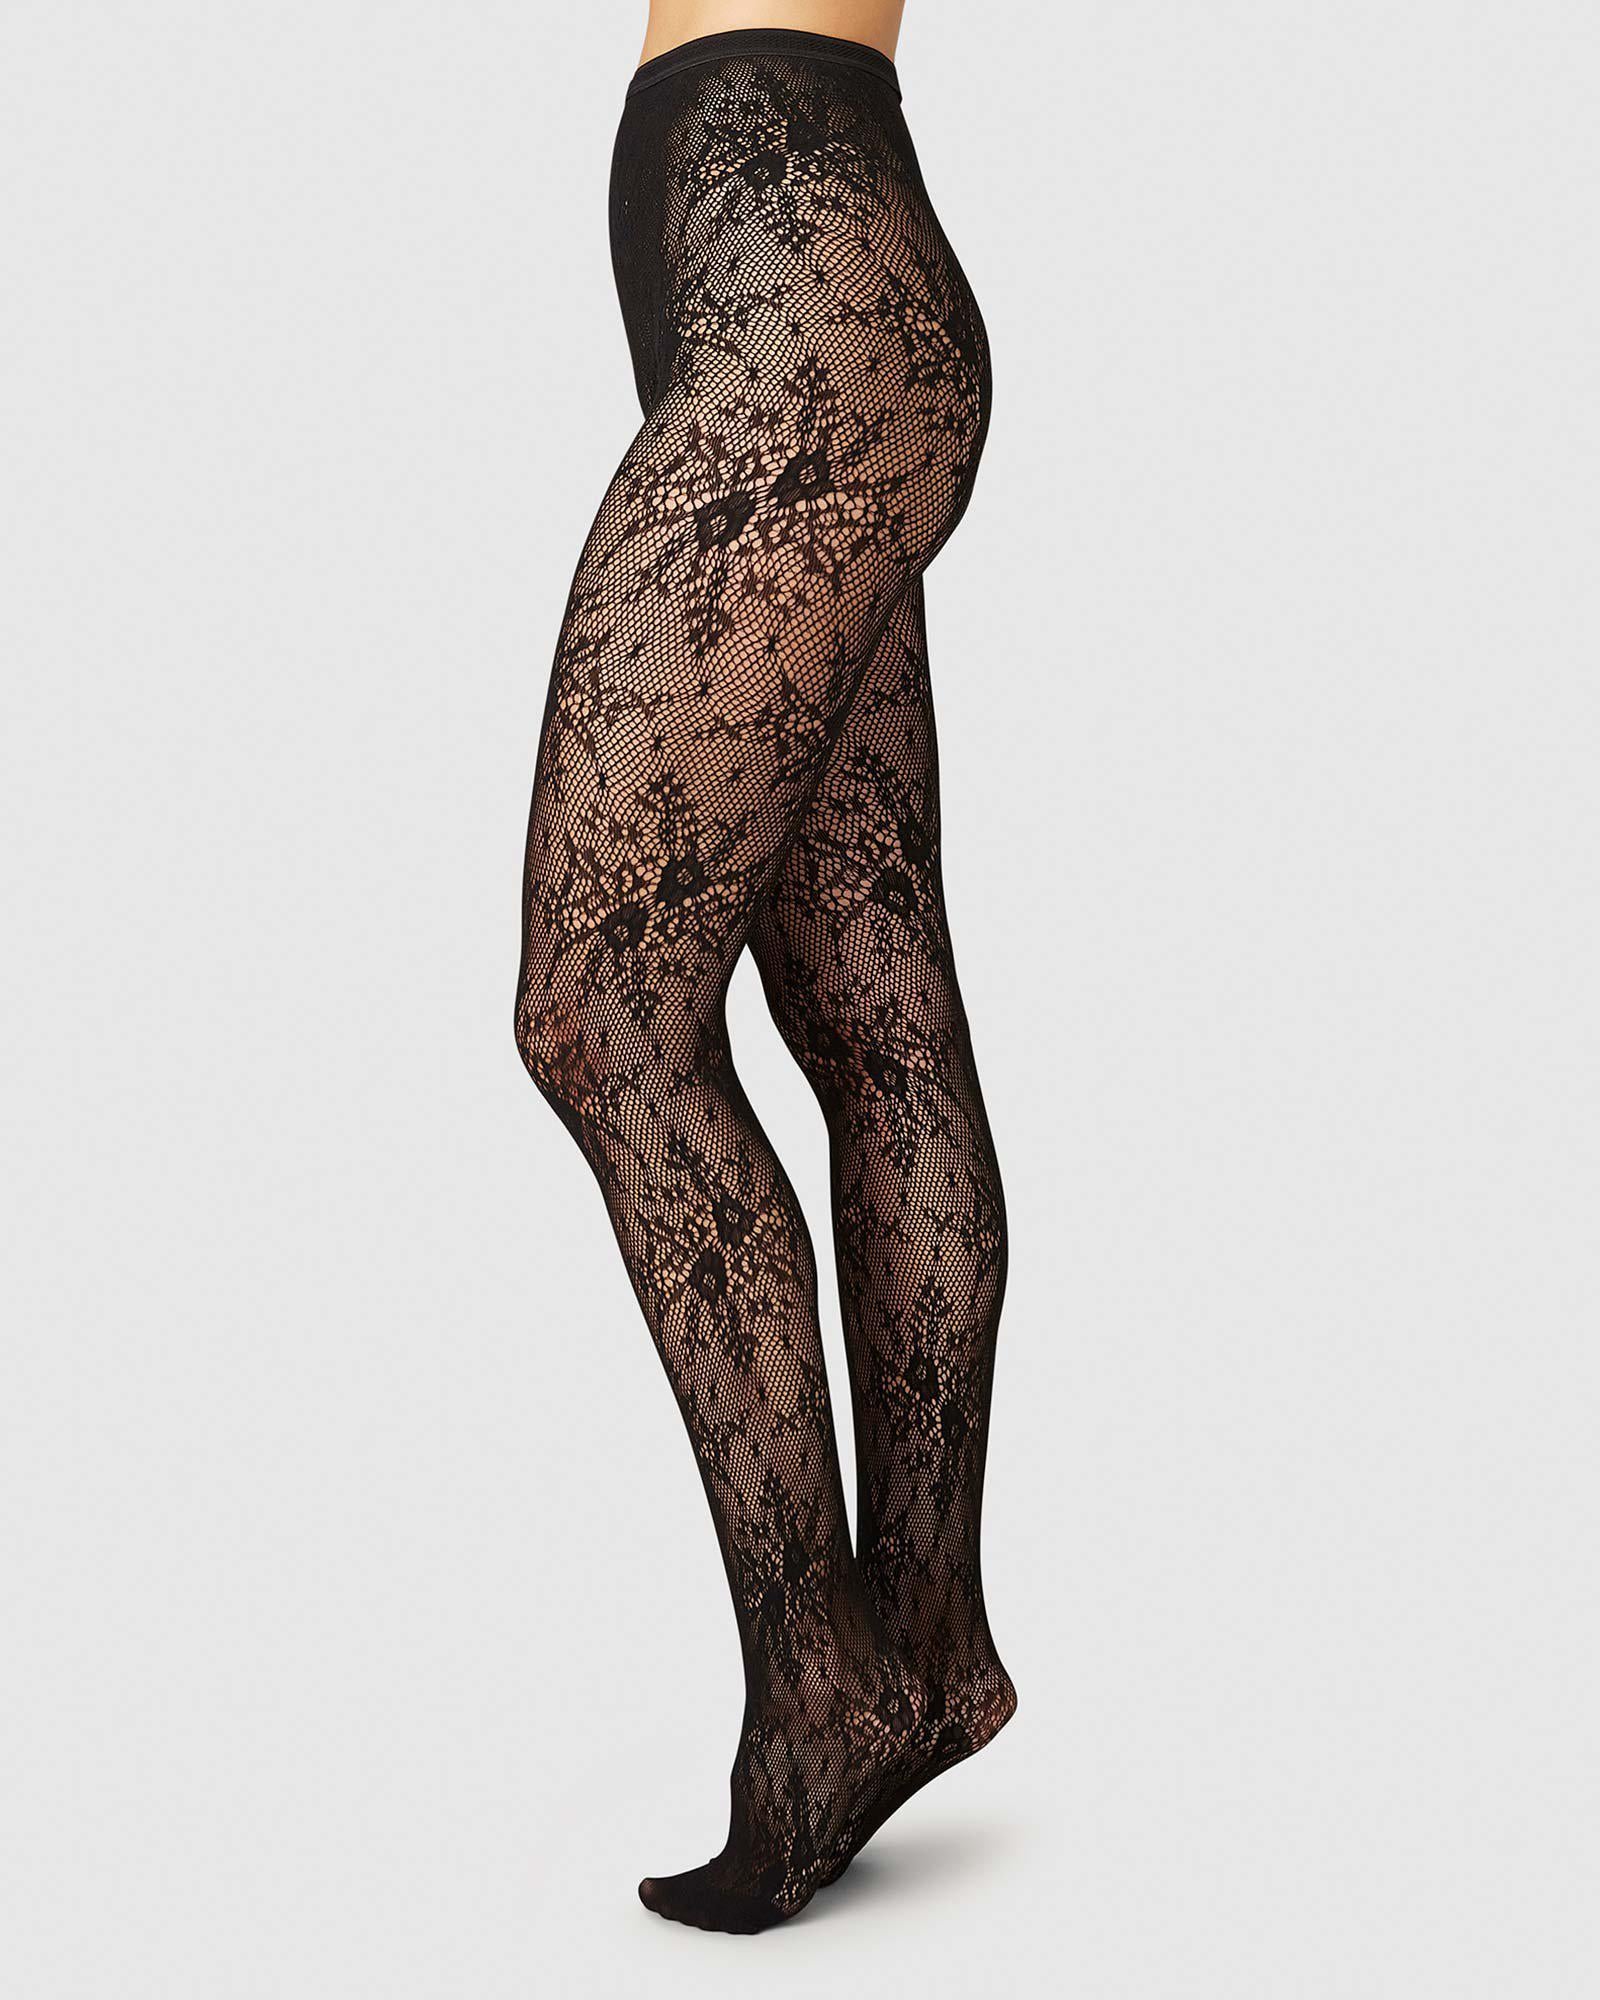  CIRCIR Women's Patterned Tights Fishnet Floral